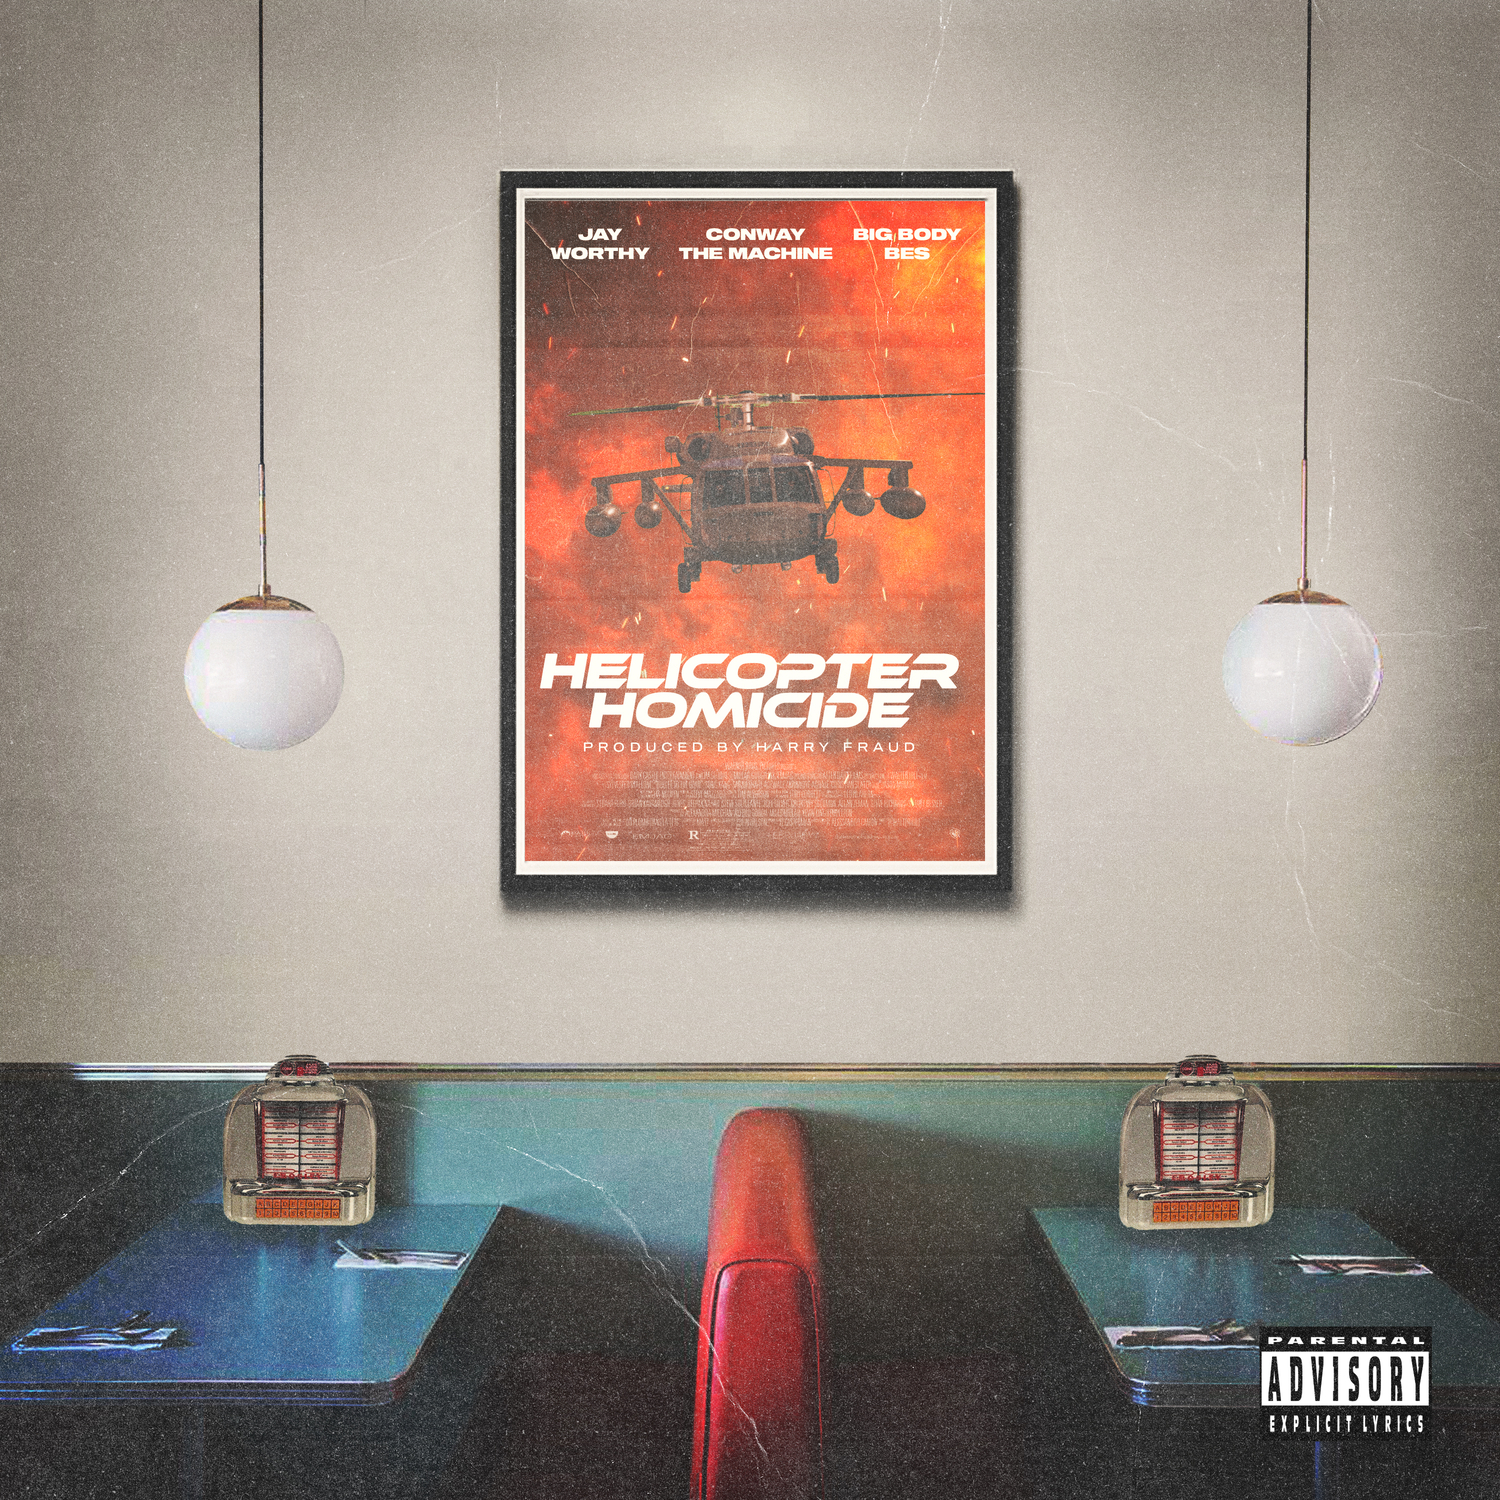 Jay Worthy & Harry Fraud feat. Conway The Machine & Big Body Bes "Helicopter Homicide" (Audio)